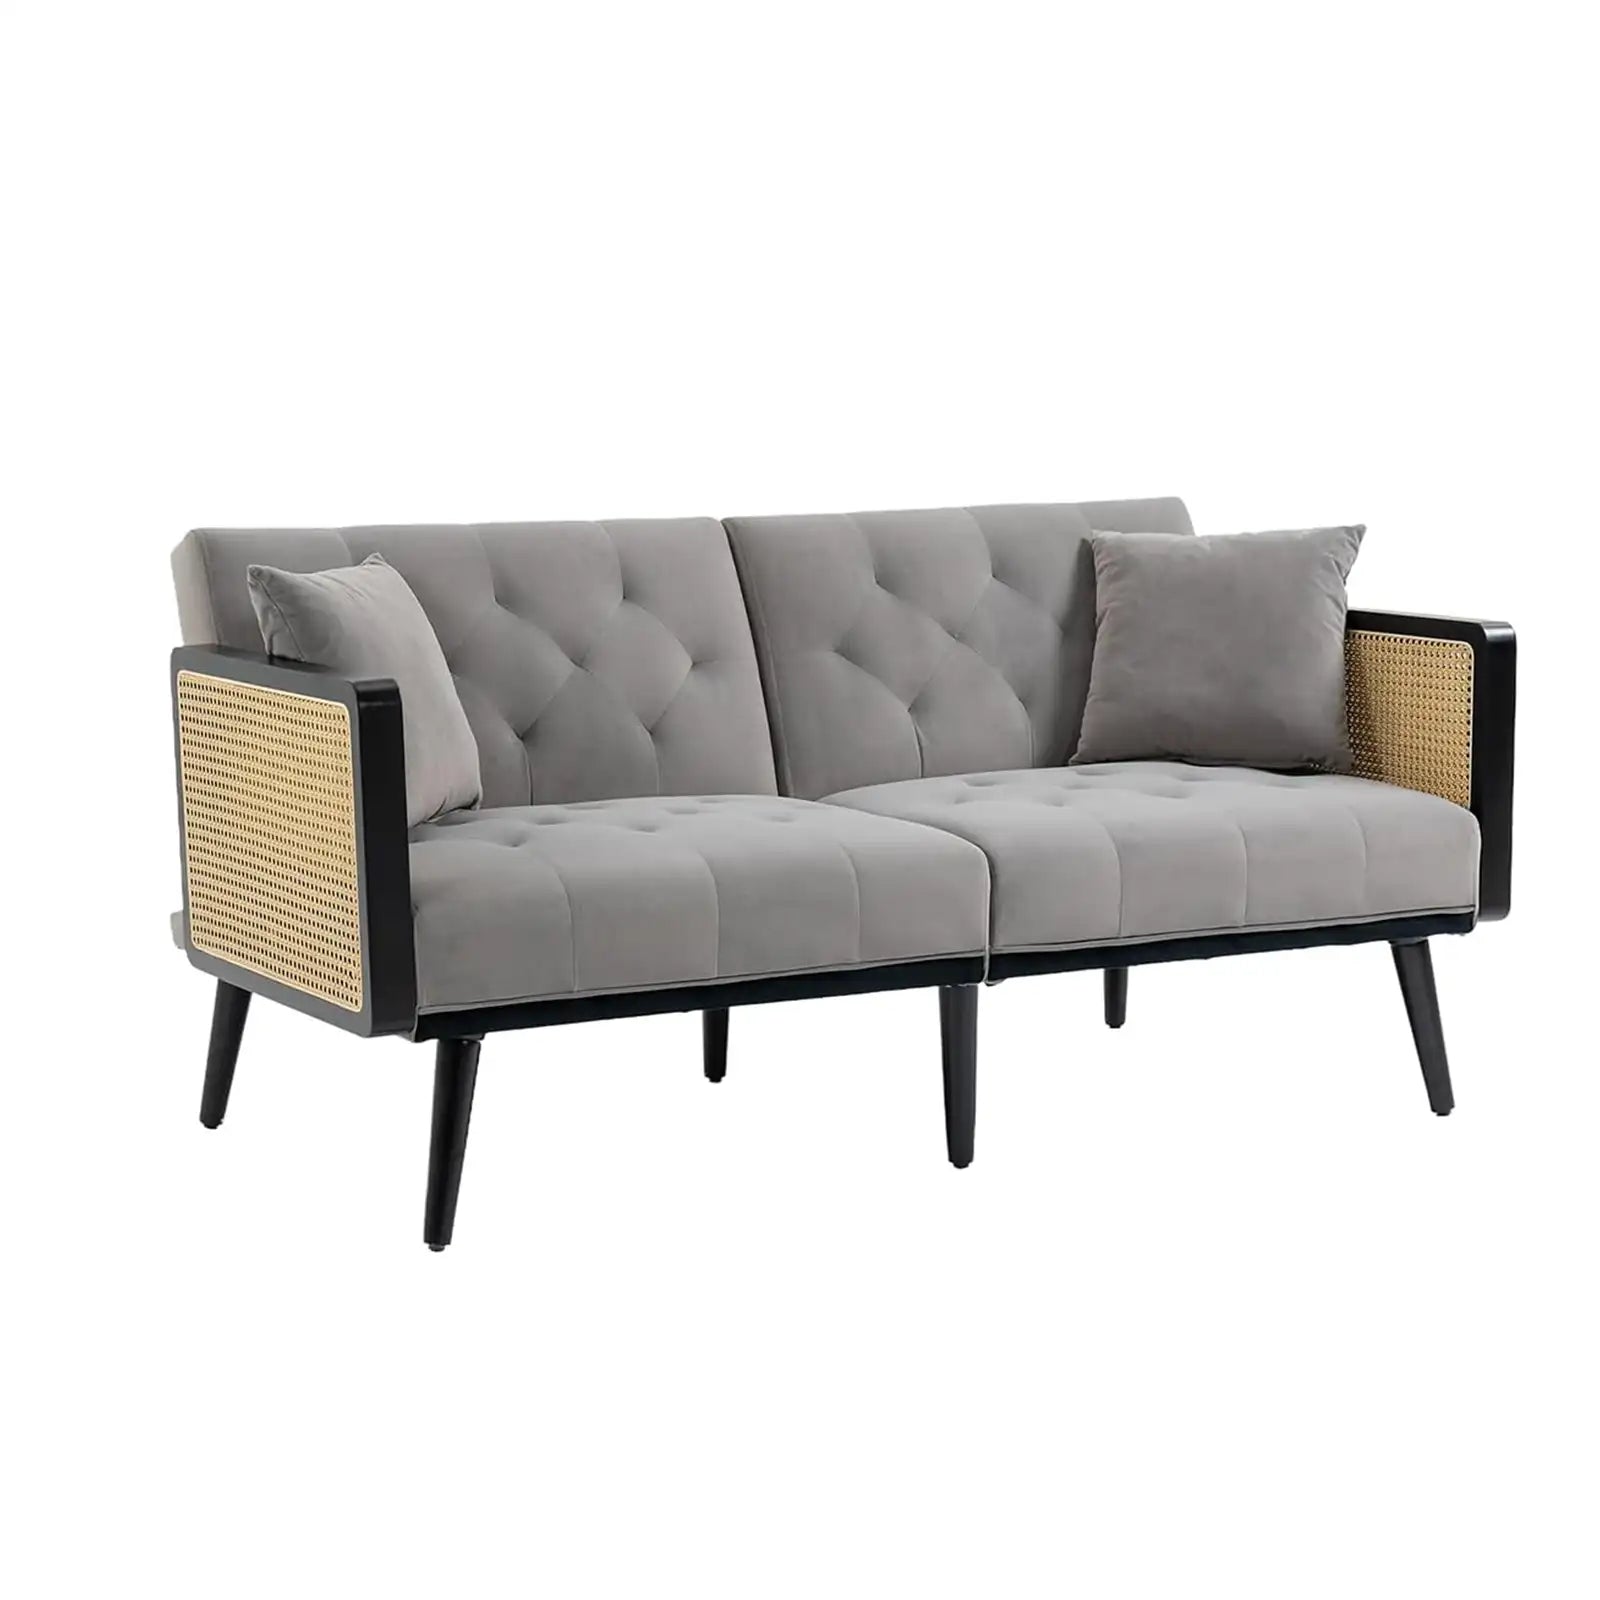 Rattan Tufted Couch, Modern Linen Sleeper Sofa, Large Comfy Upholstered Loveseat